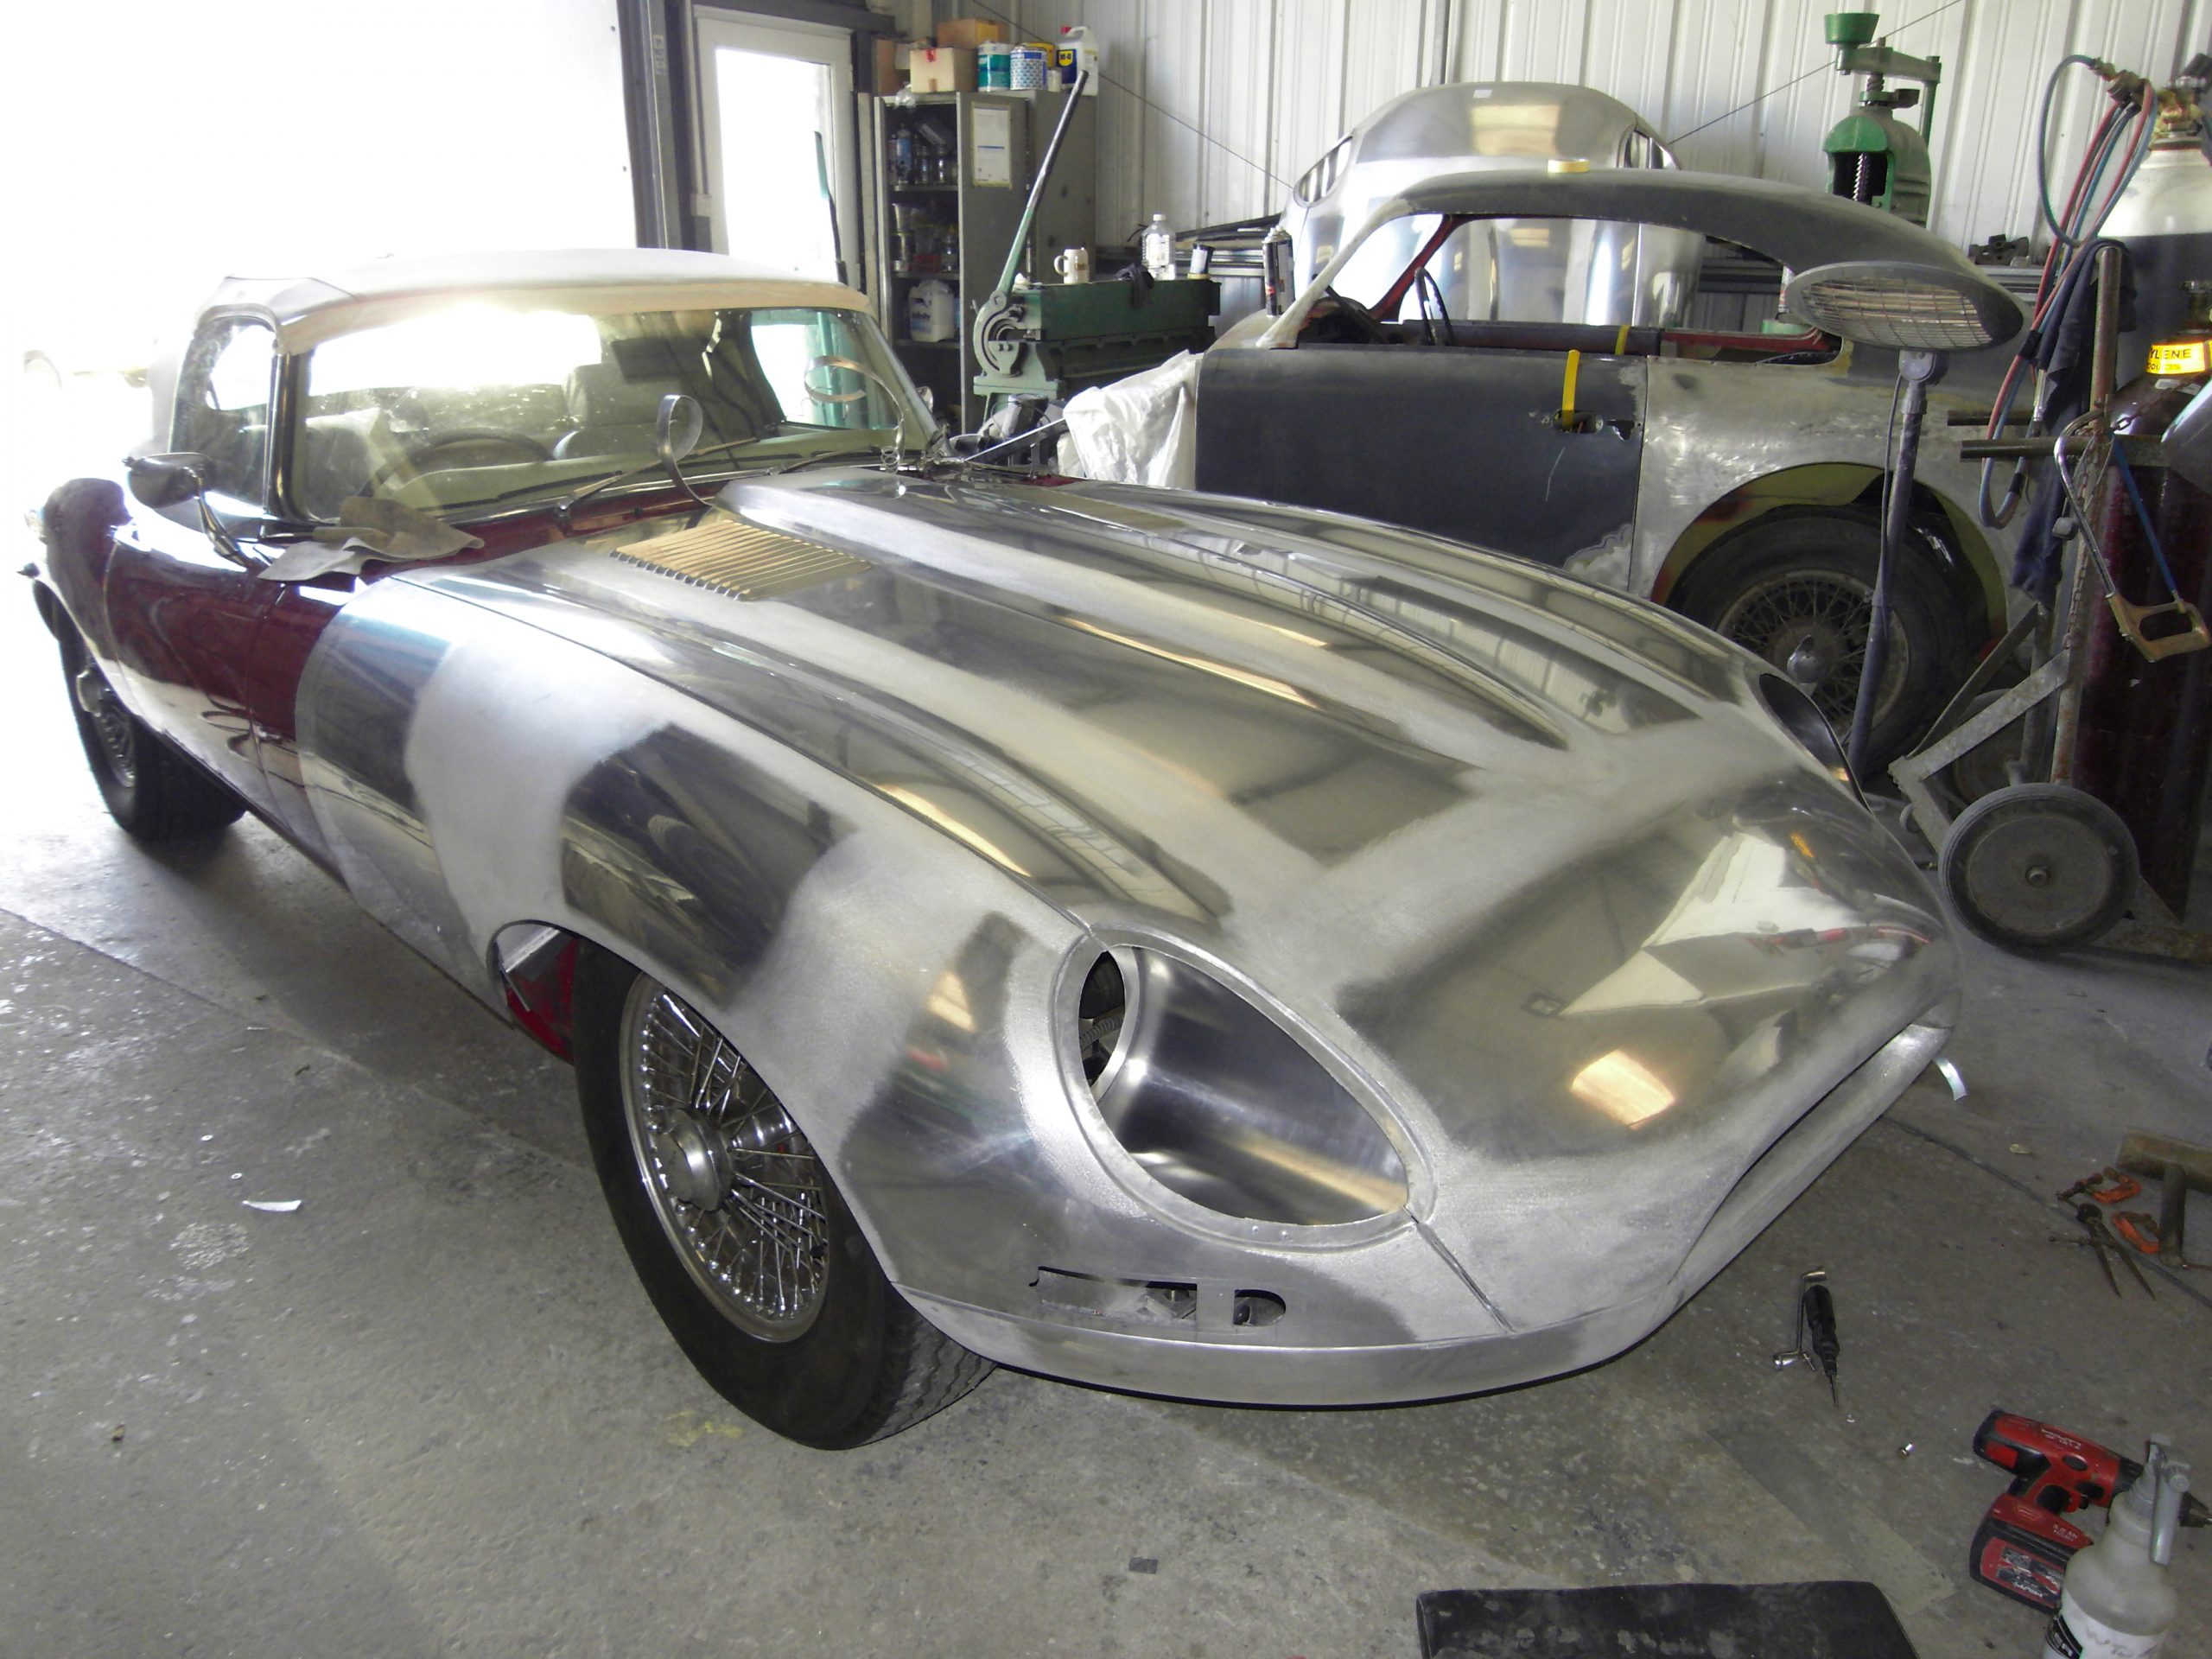 New etype bonnet being fitted